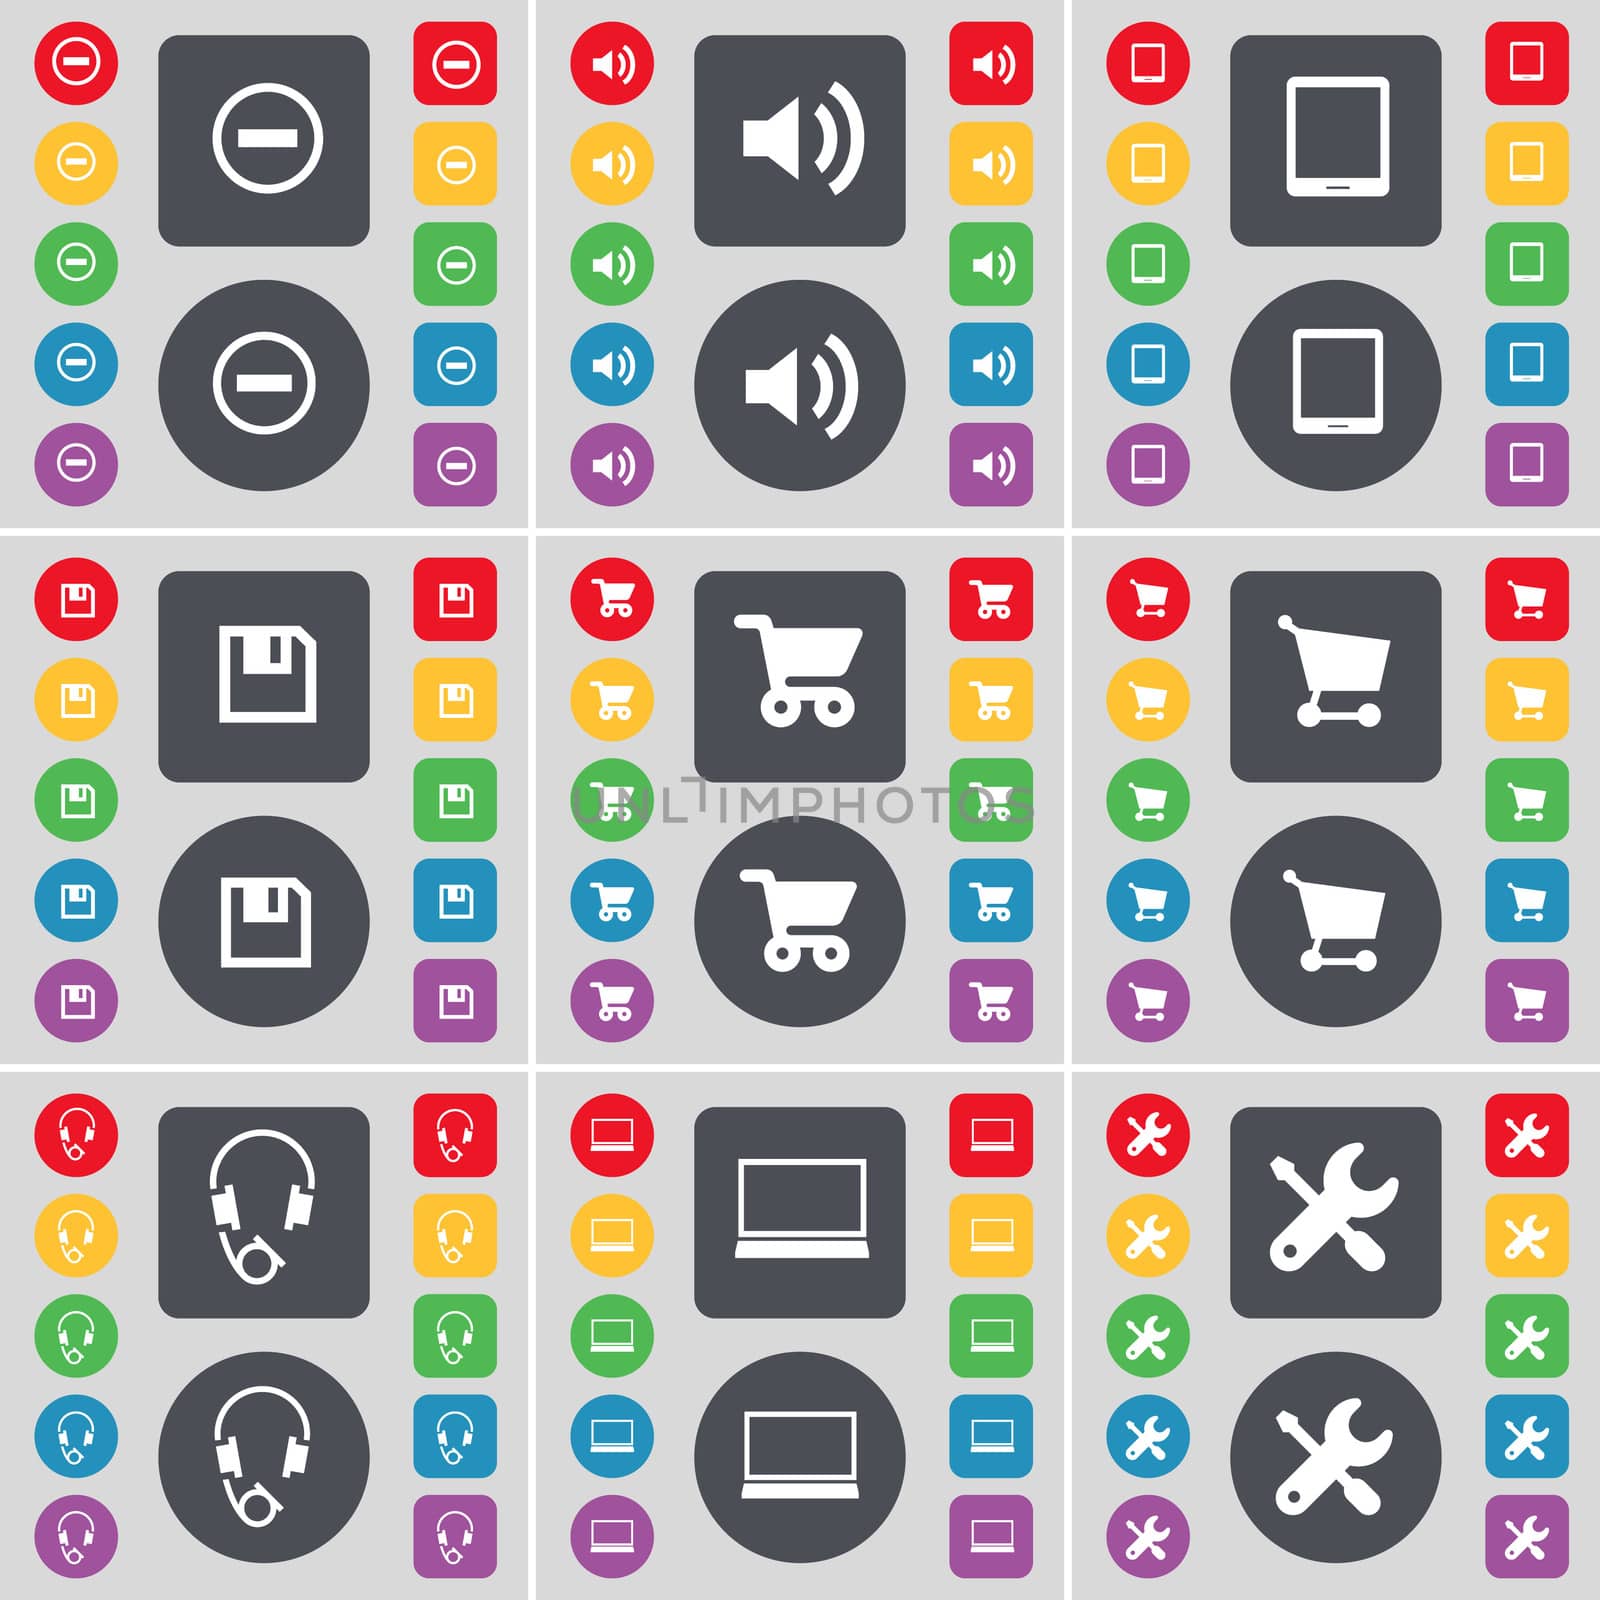 Minus, Sound, Tablet PC, Floppy, Shopping cart, Headphones, Laptop, Wrench icon symbol. A large set of flat, colored buttons for your design. illustration